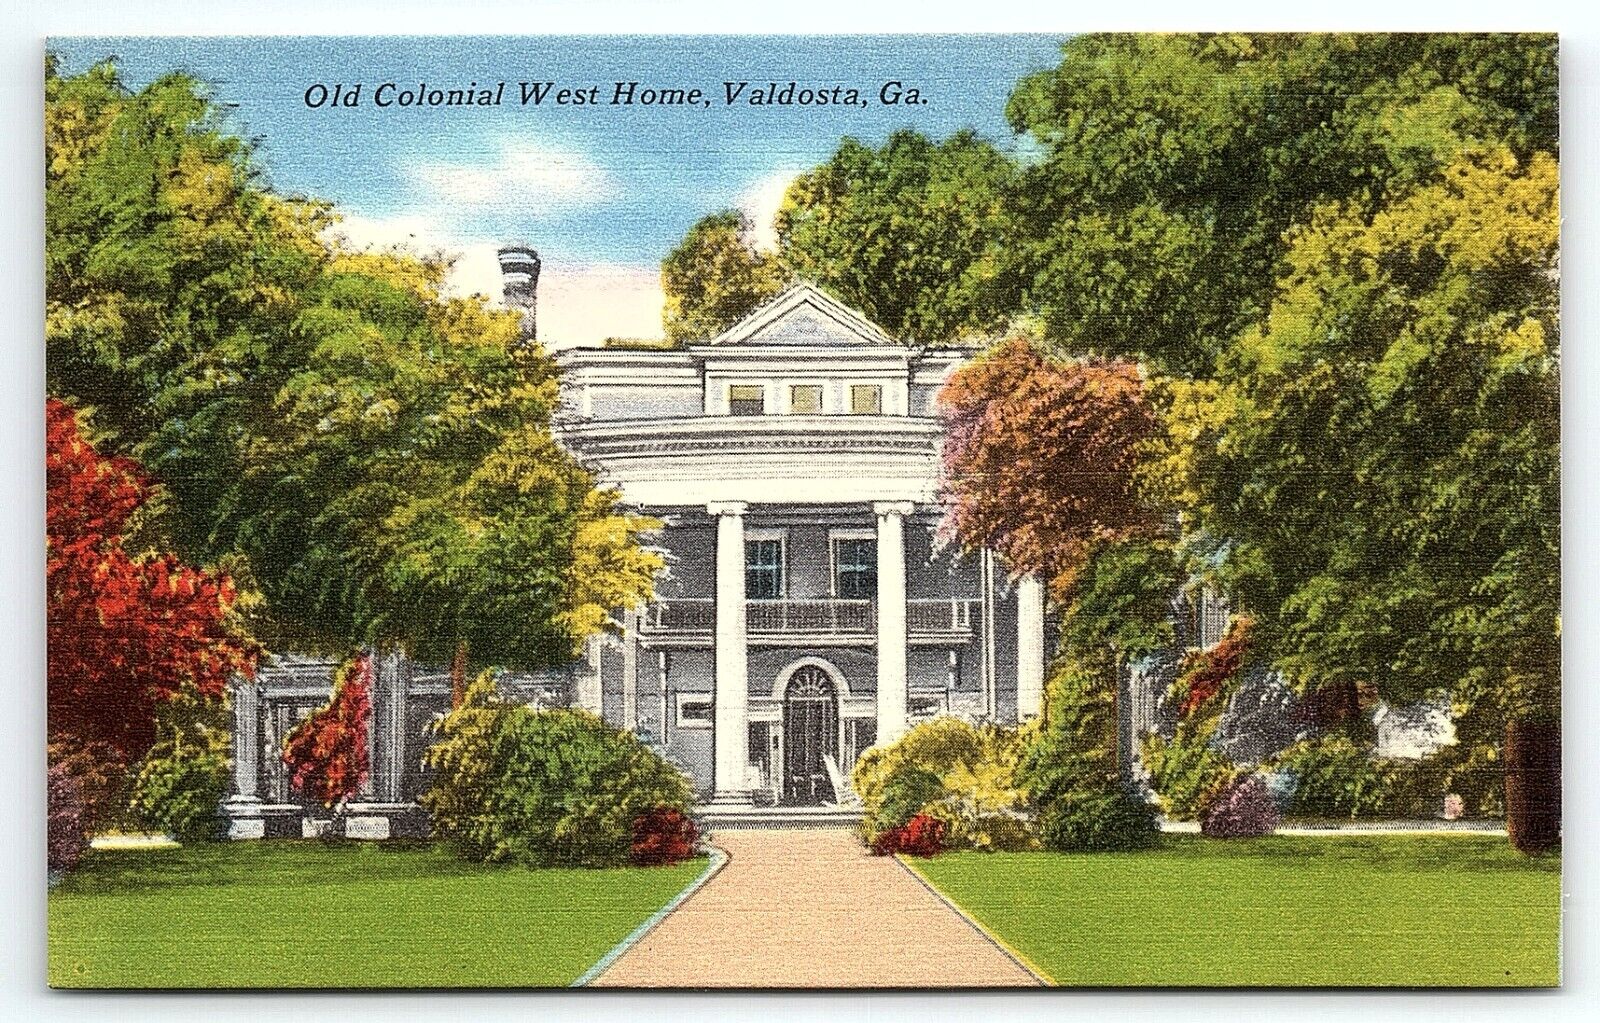 1940s VALDOSTA GEORGIA OLD COLONIAL WEST HOME UNPOSTED LINEN POSTCARD P4898